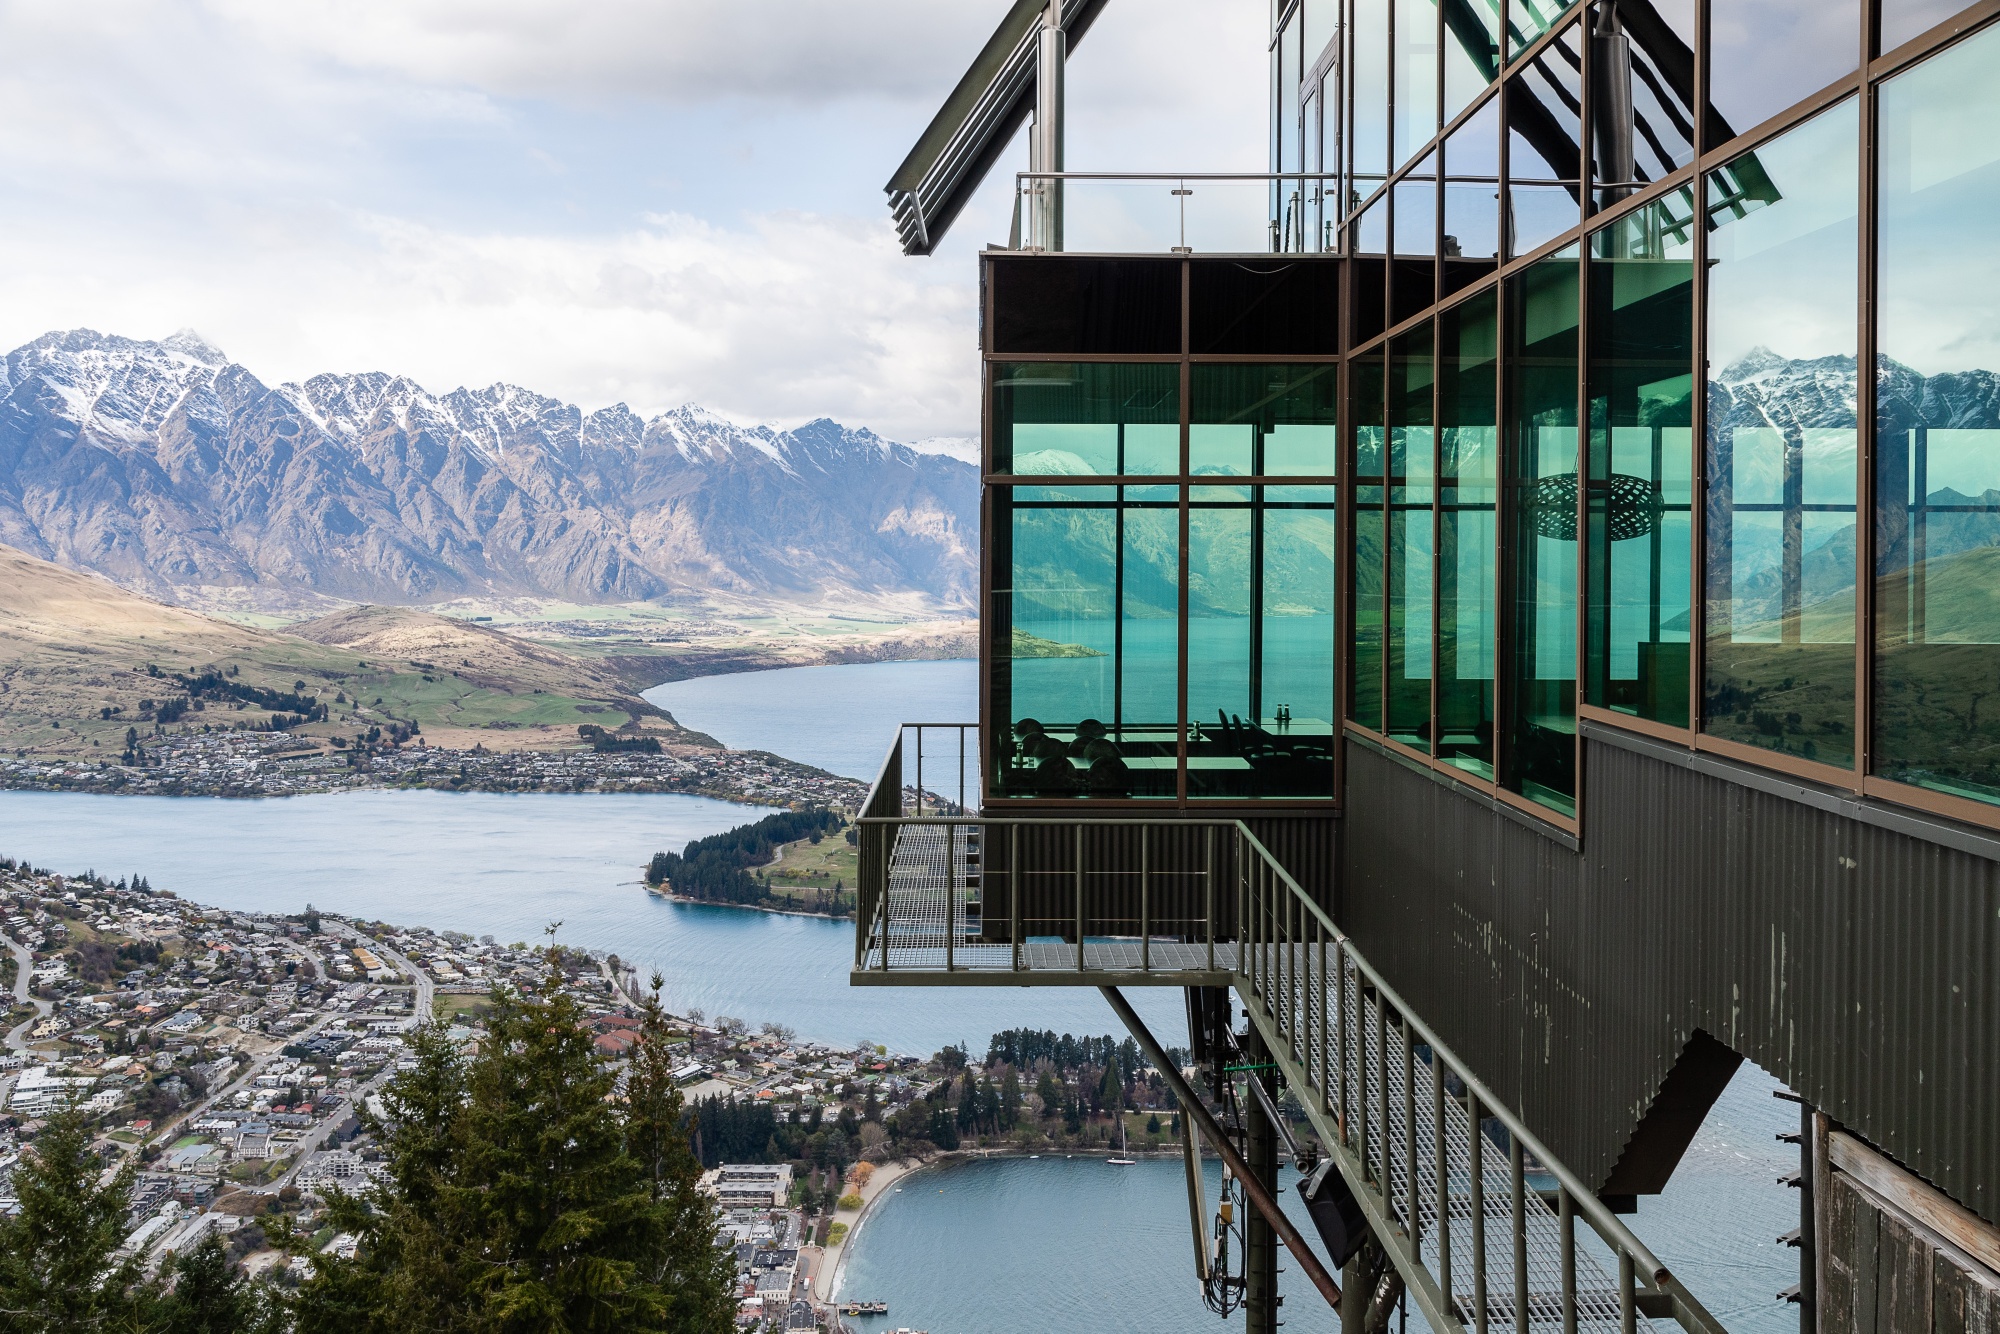 Queenstown and Lake Wakatipu seen from the top of Bob's peak in Queenstown, New Zealand on Sept. 9.